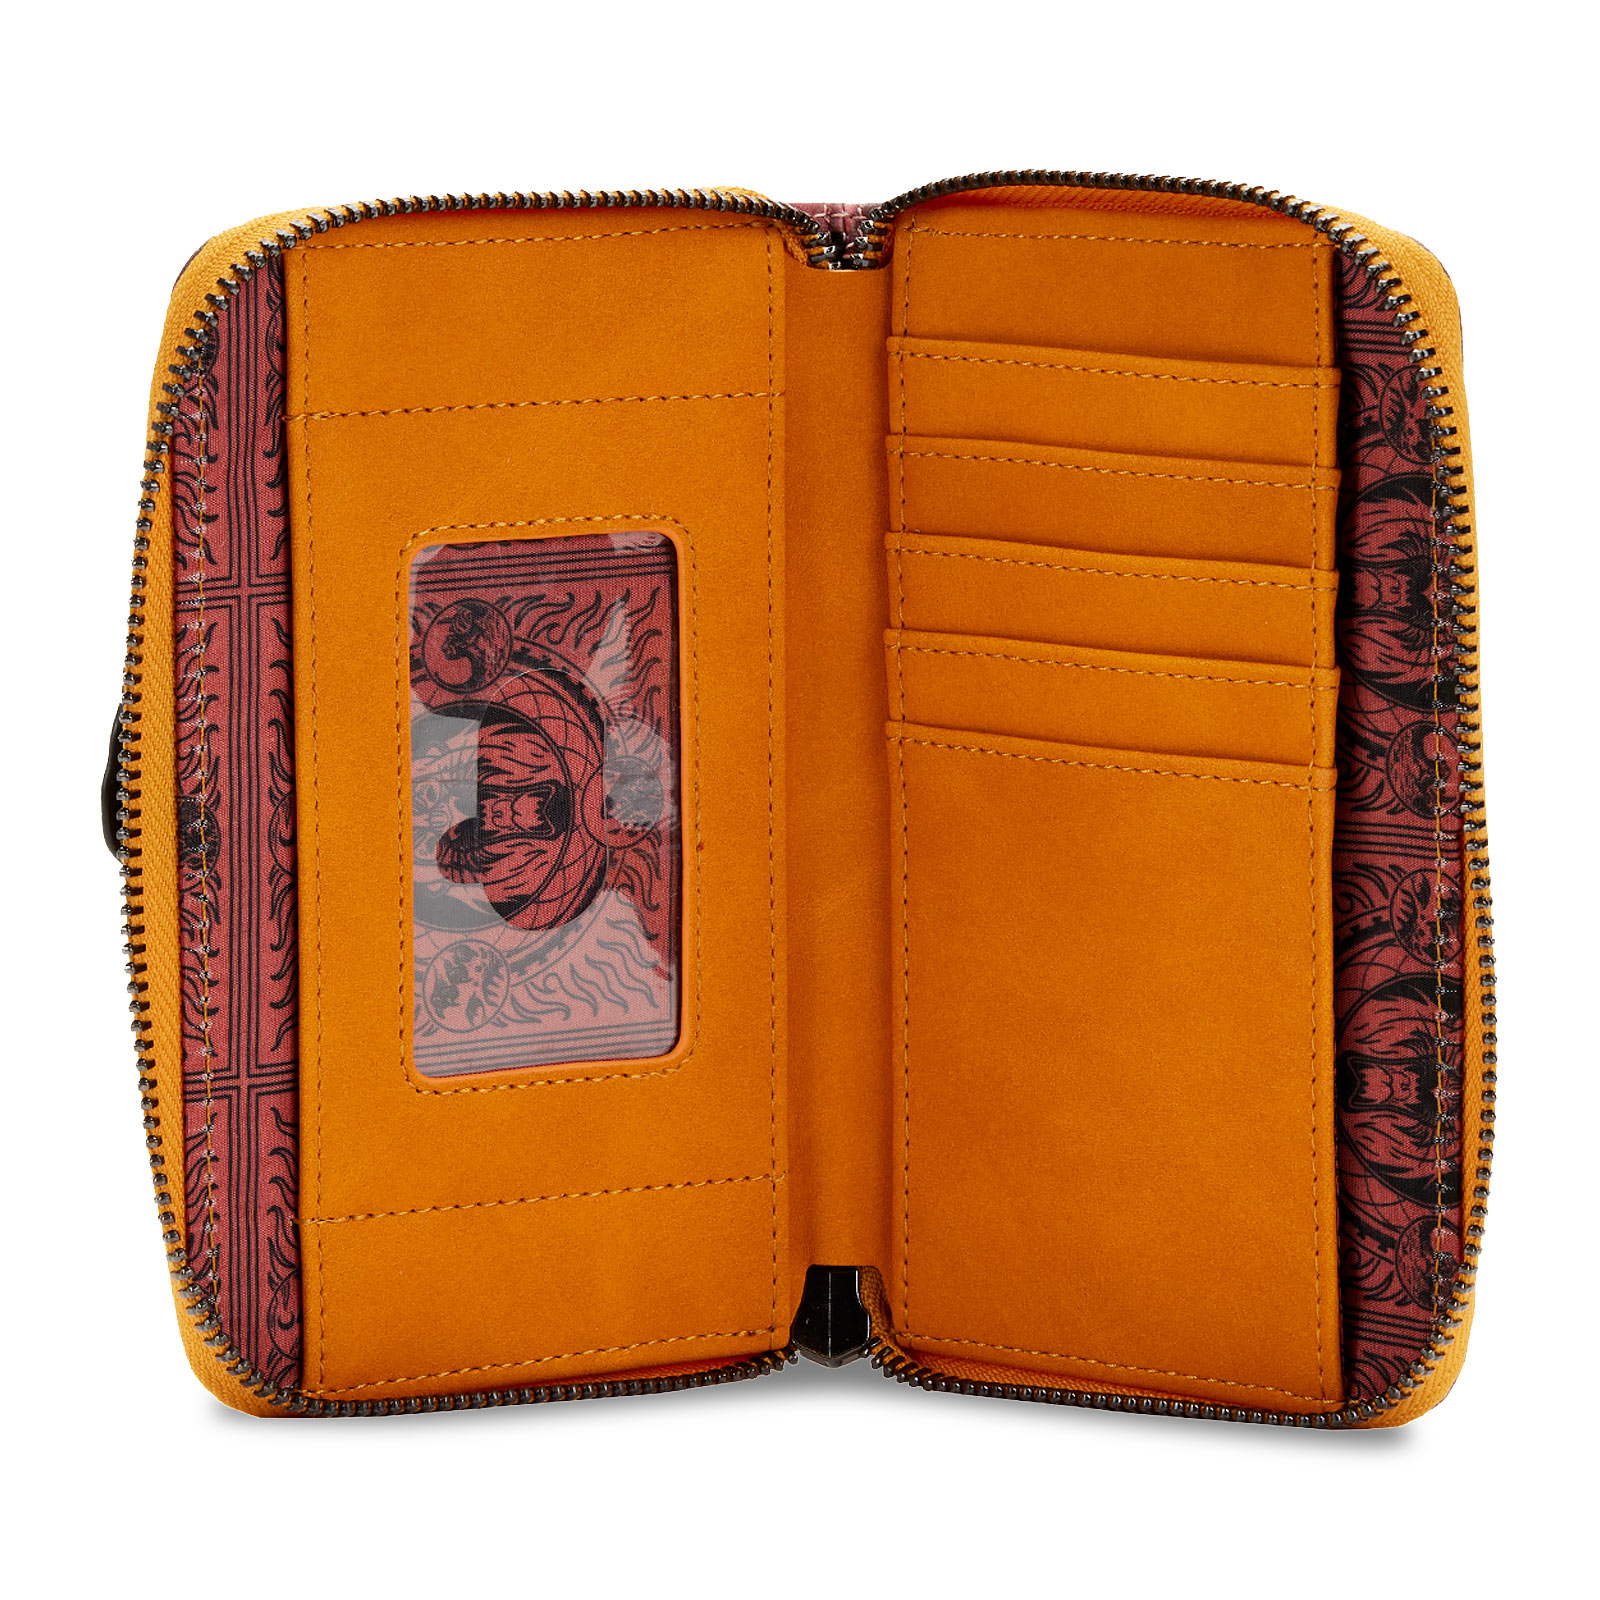 The Lion King - Scar Wallet